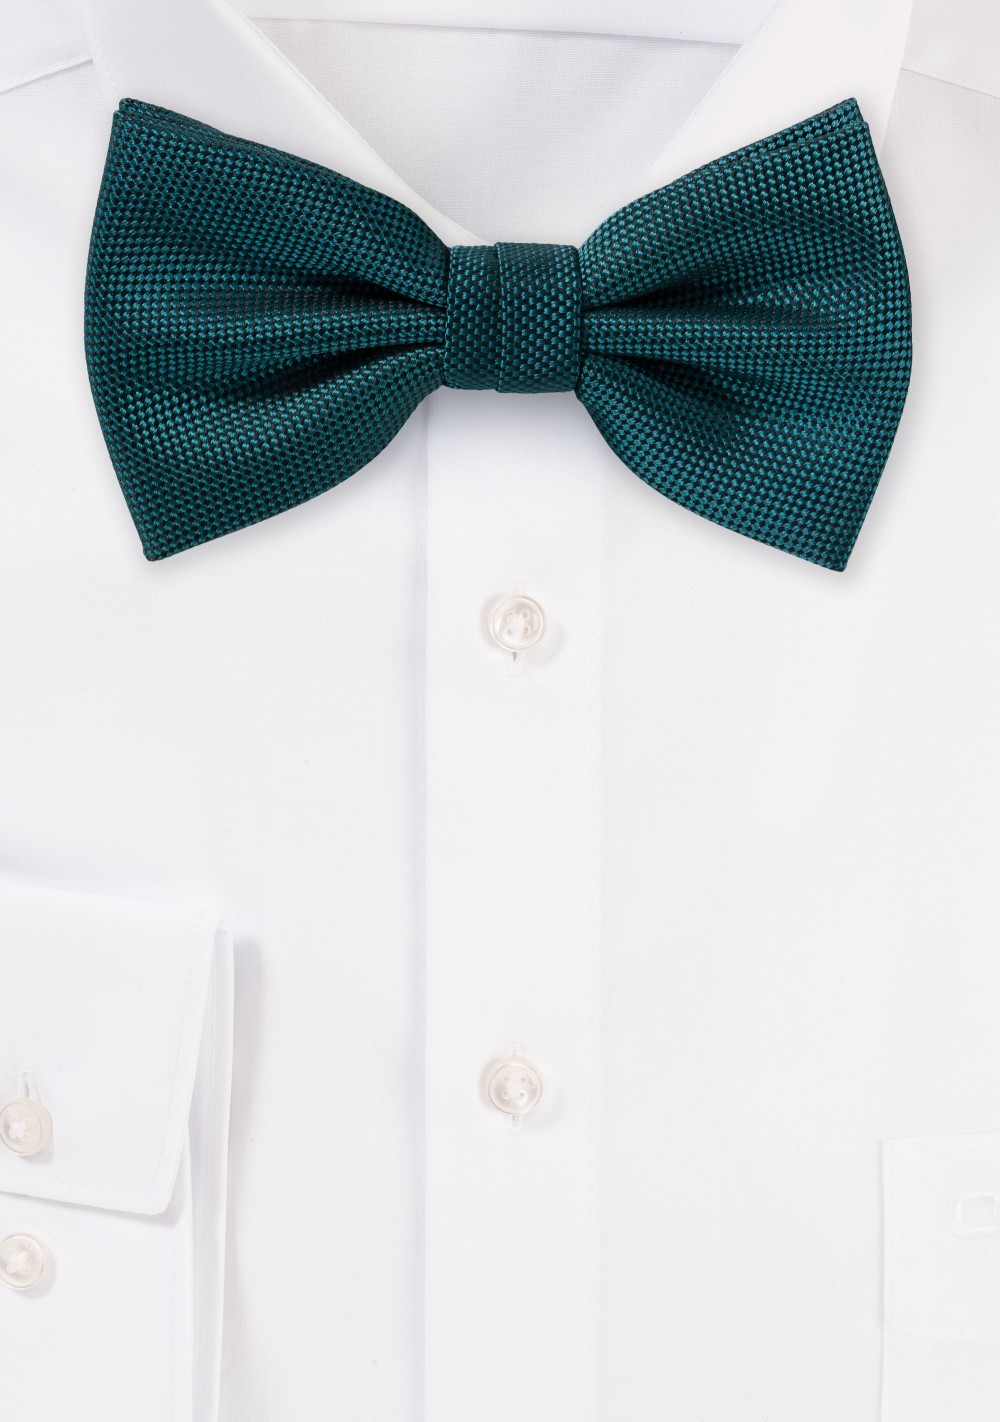 Textured Peacock Matte Colored Bow Tie